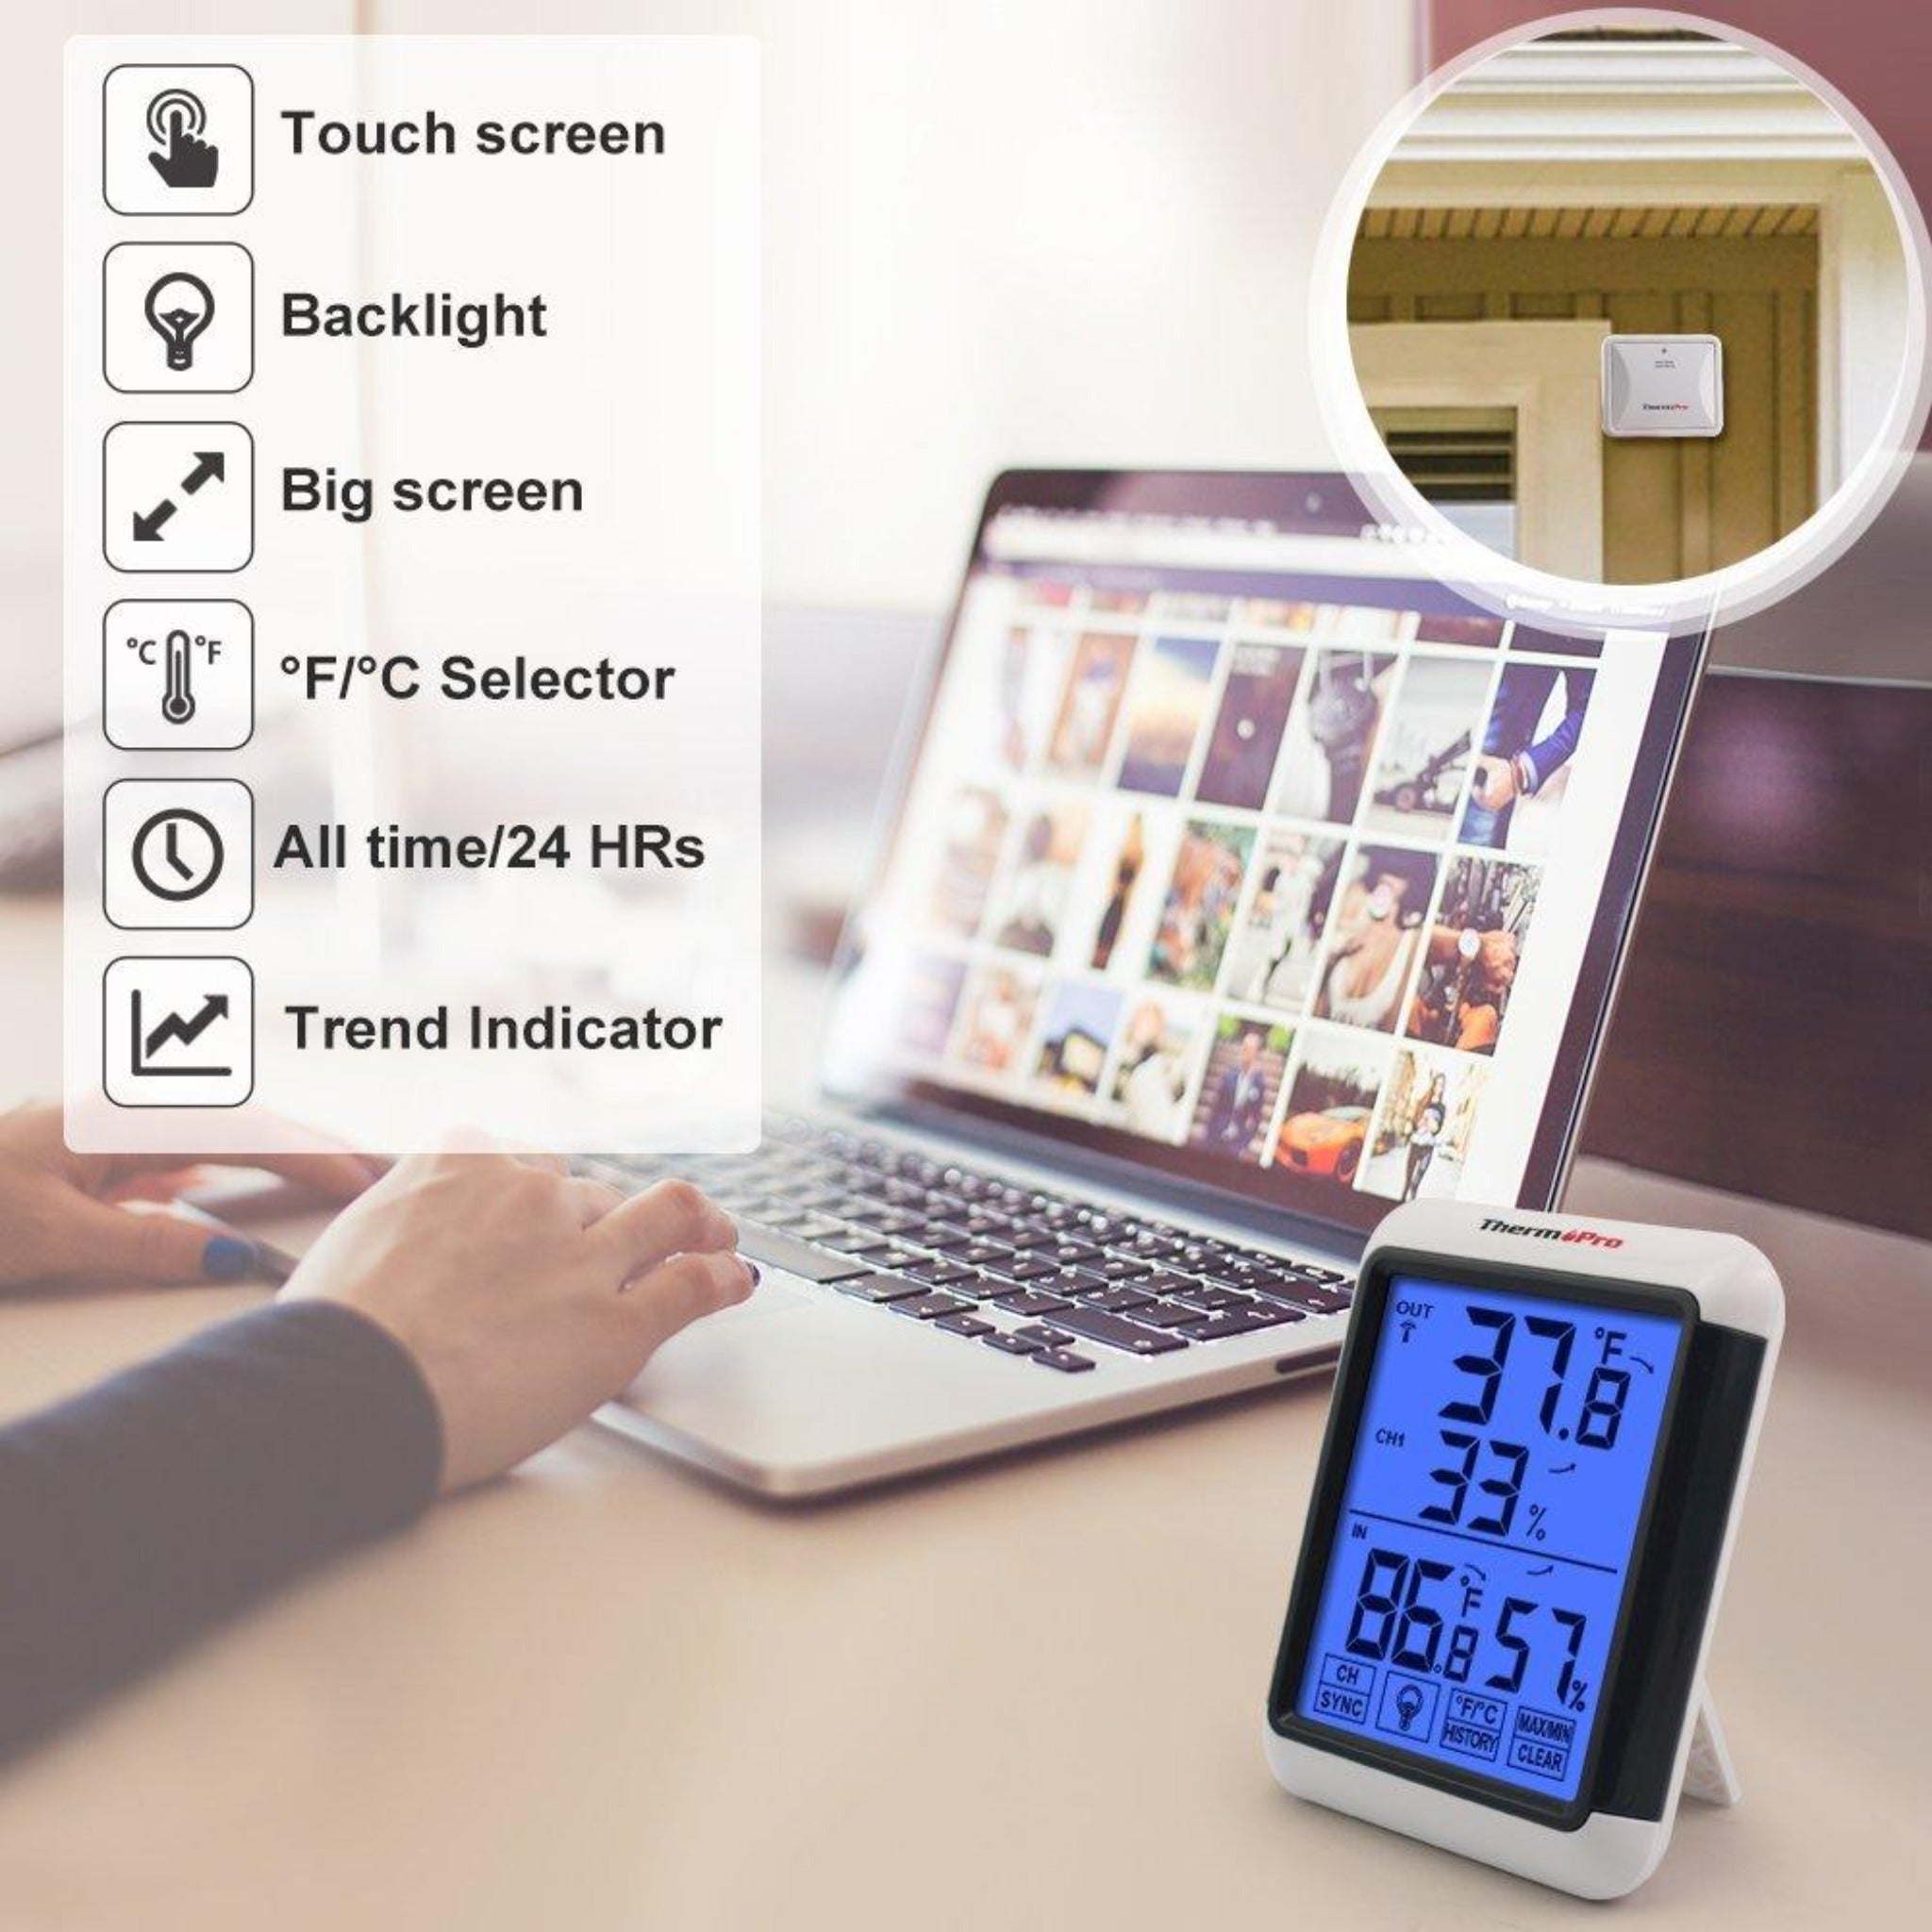 Hatching Time Therm Pro. Features listed : Touch screen, backlight, big screen, Fahrenheit/Celsius selector, All time/24hr settings trend indicator. 